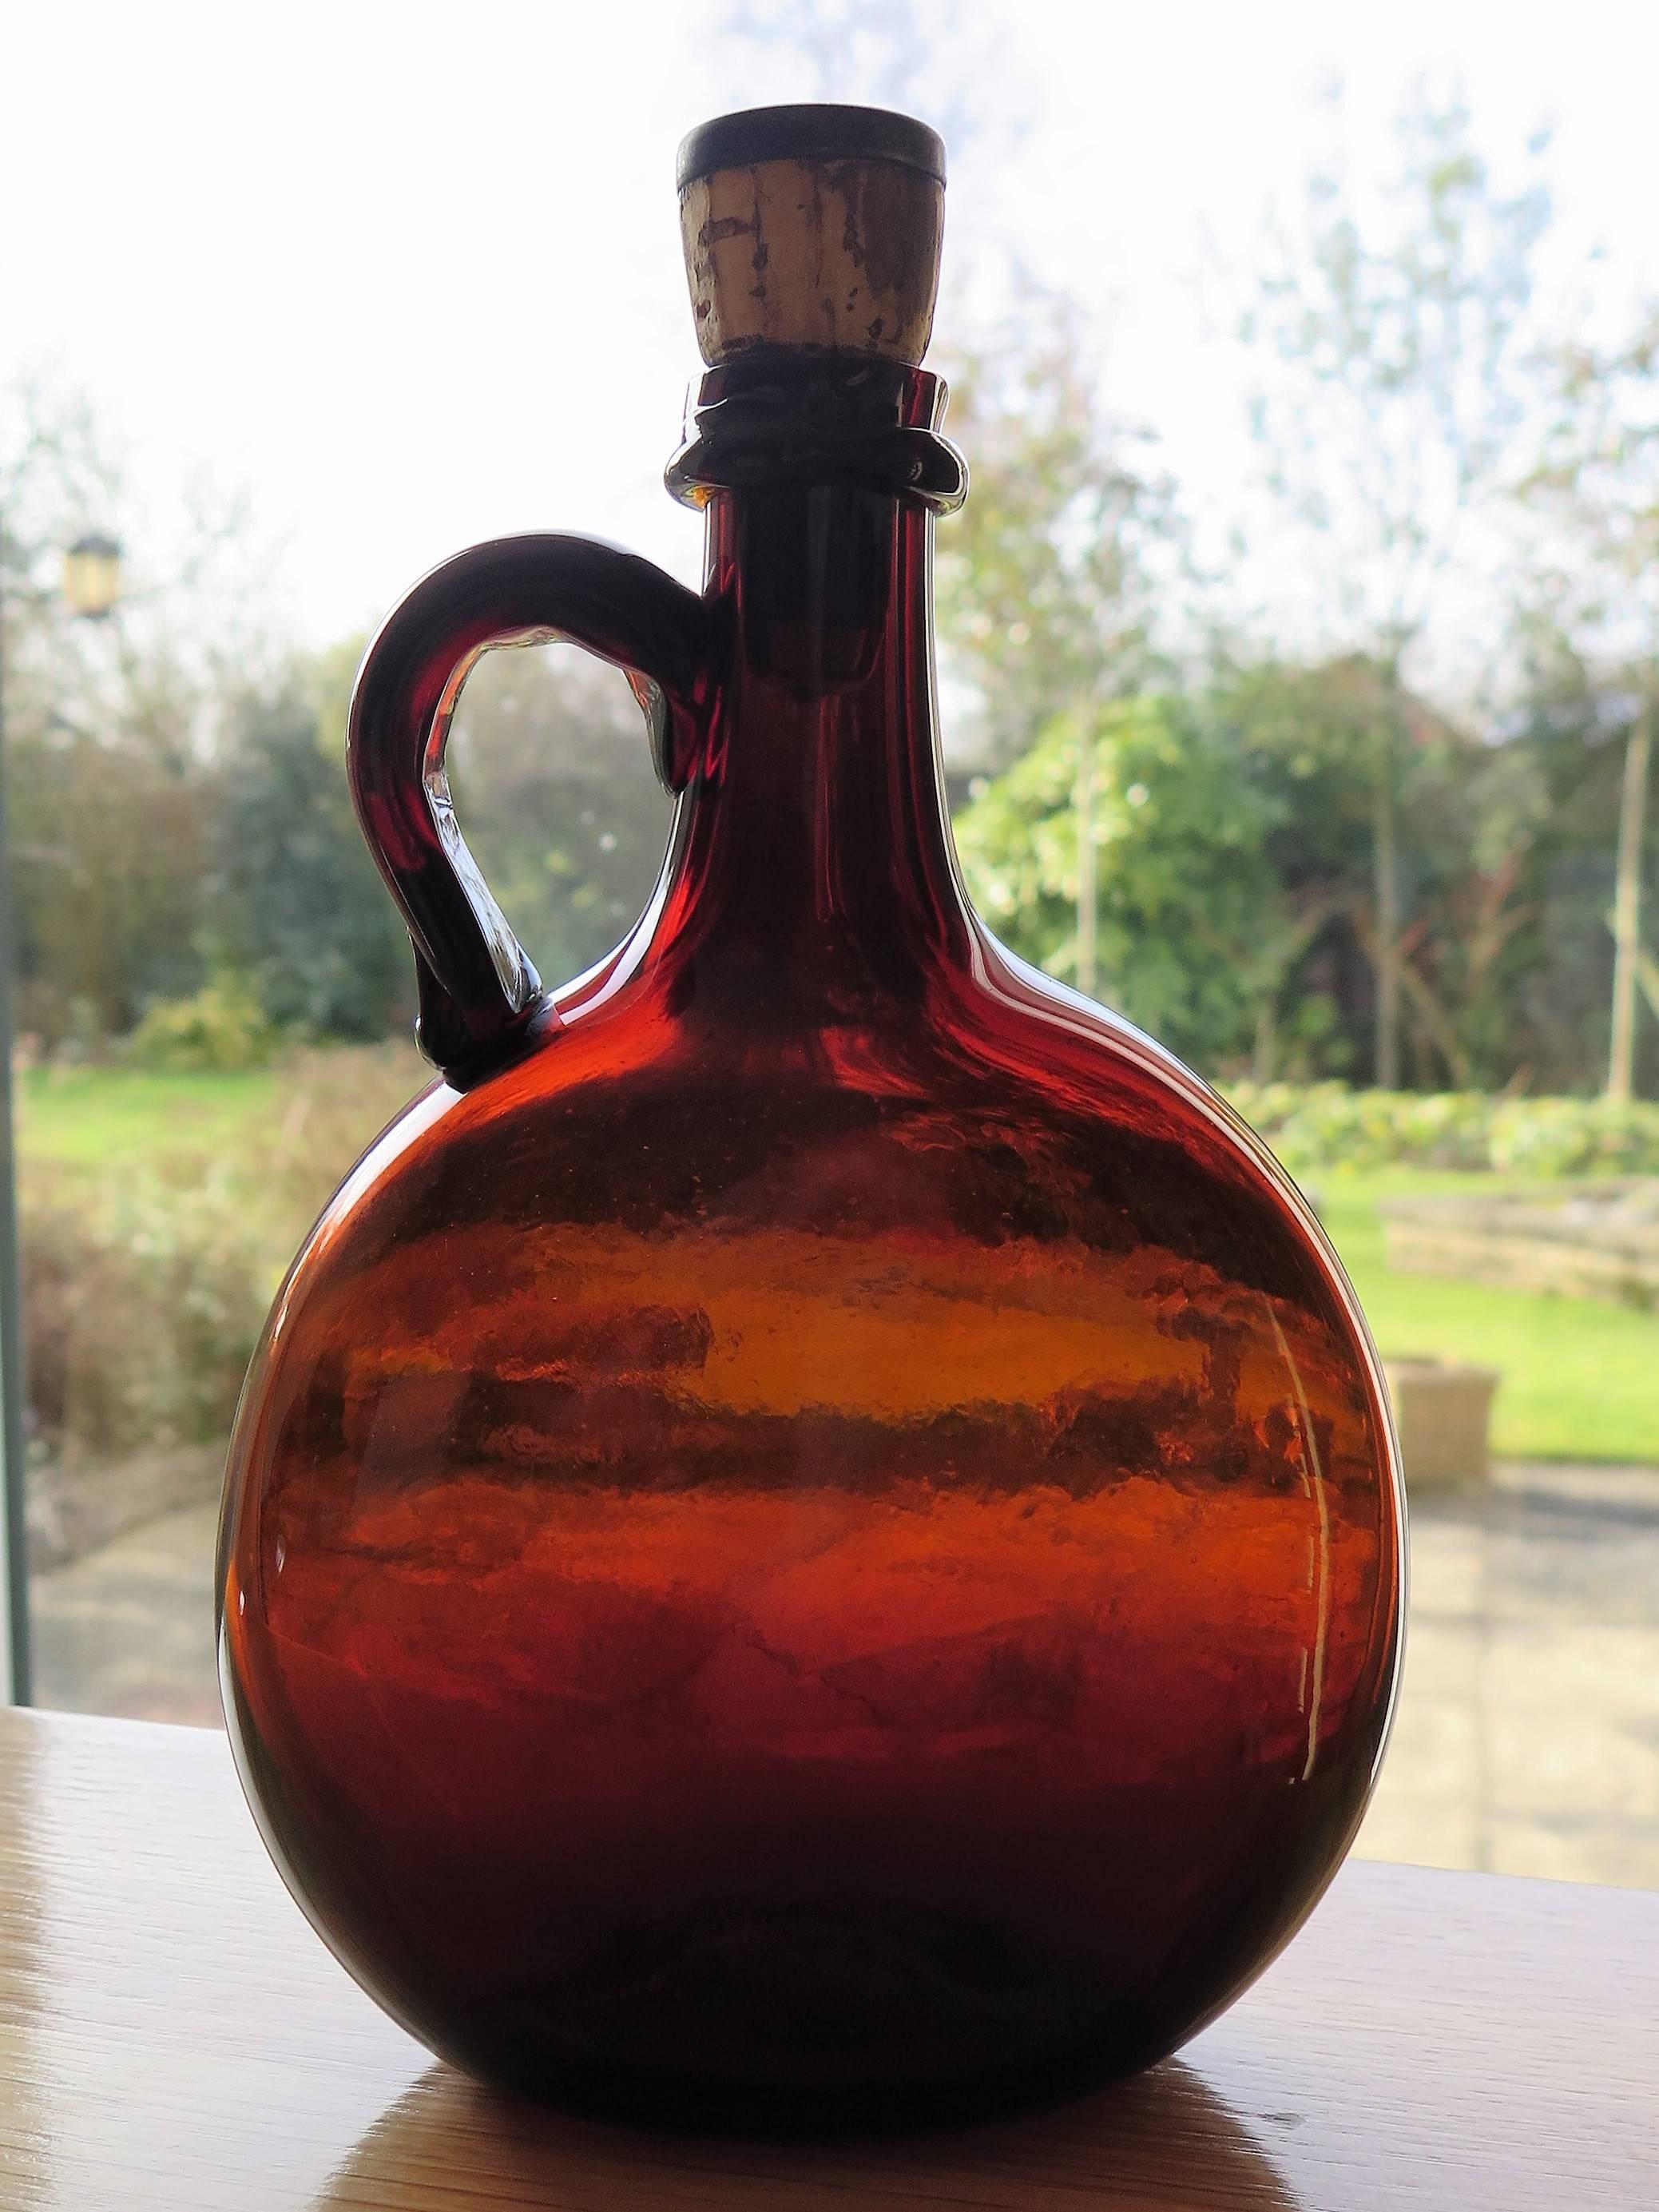 This is a good handblown, amber glass flagon or jug, dating to the early 19th century.

The jug has a circular compressed shape with a loop handle and narrow neck. It is hand blown from amber glass with a rough pontil mark from the blowing process